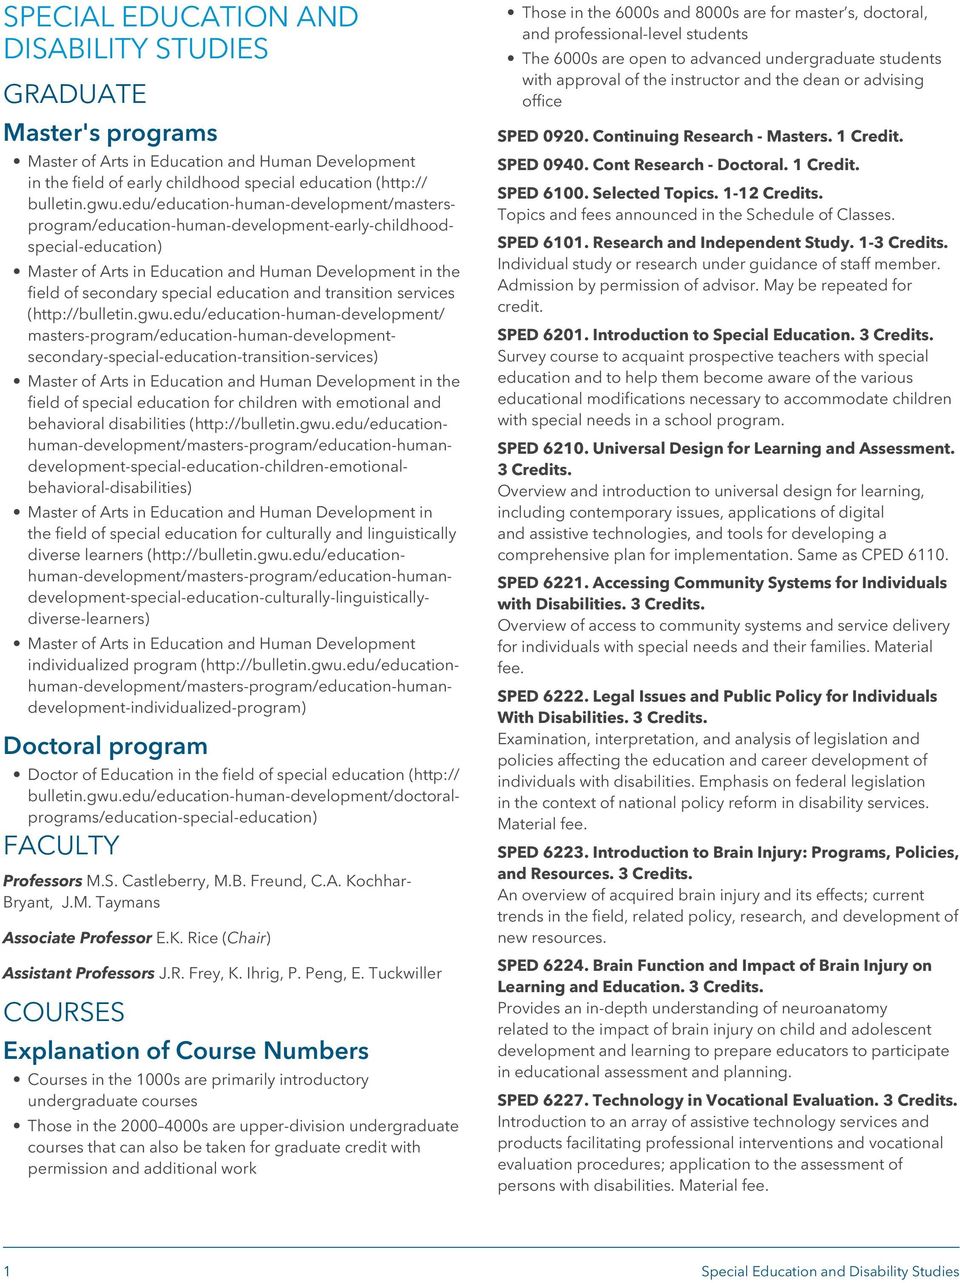 education and transition services (http://bulletin.gwu.